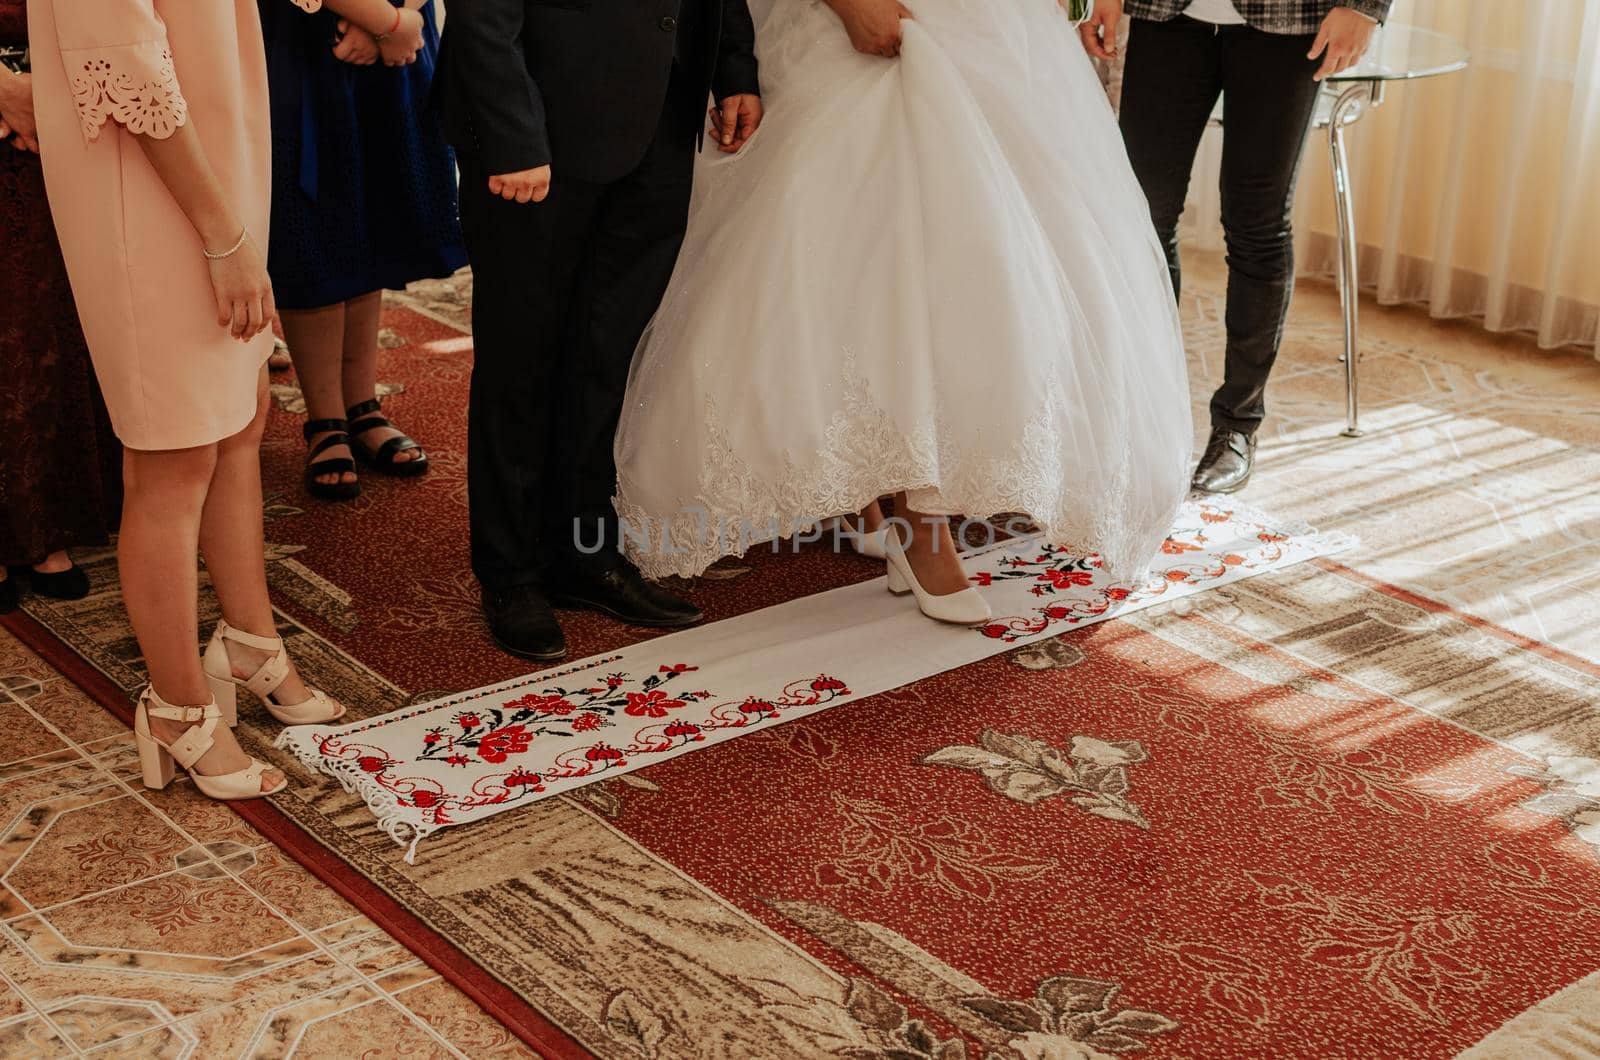 The bride and groom take a step on white national towels. by AndriiDrachuk